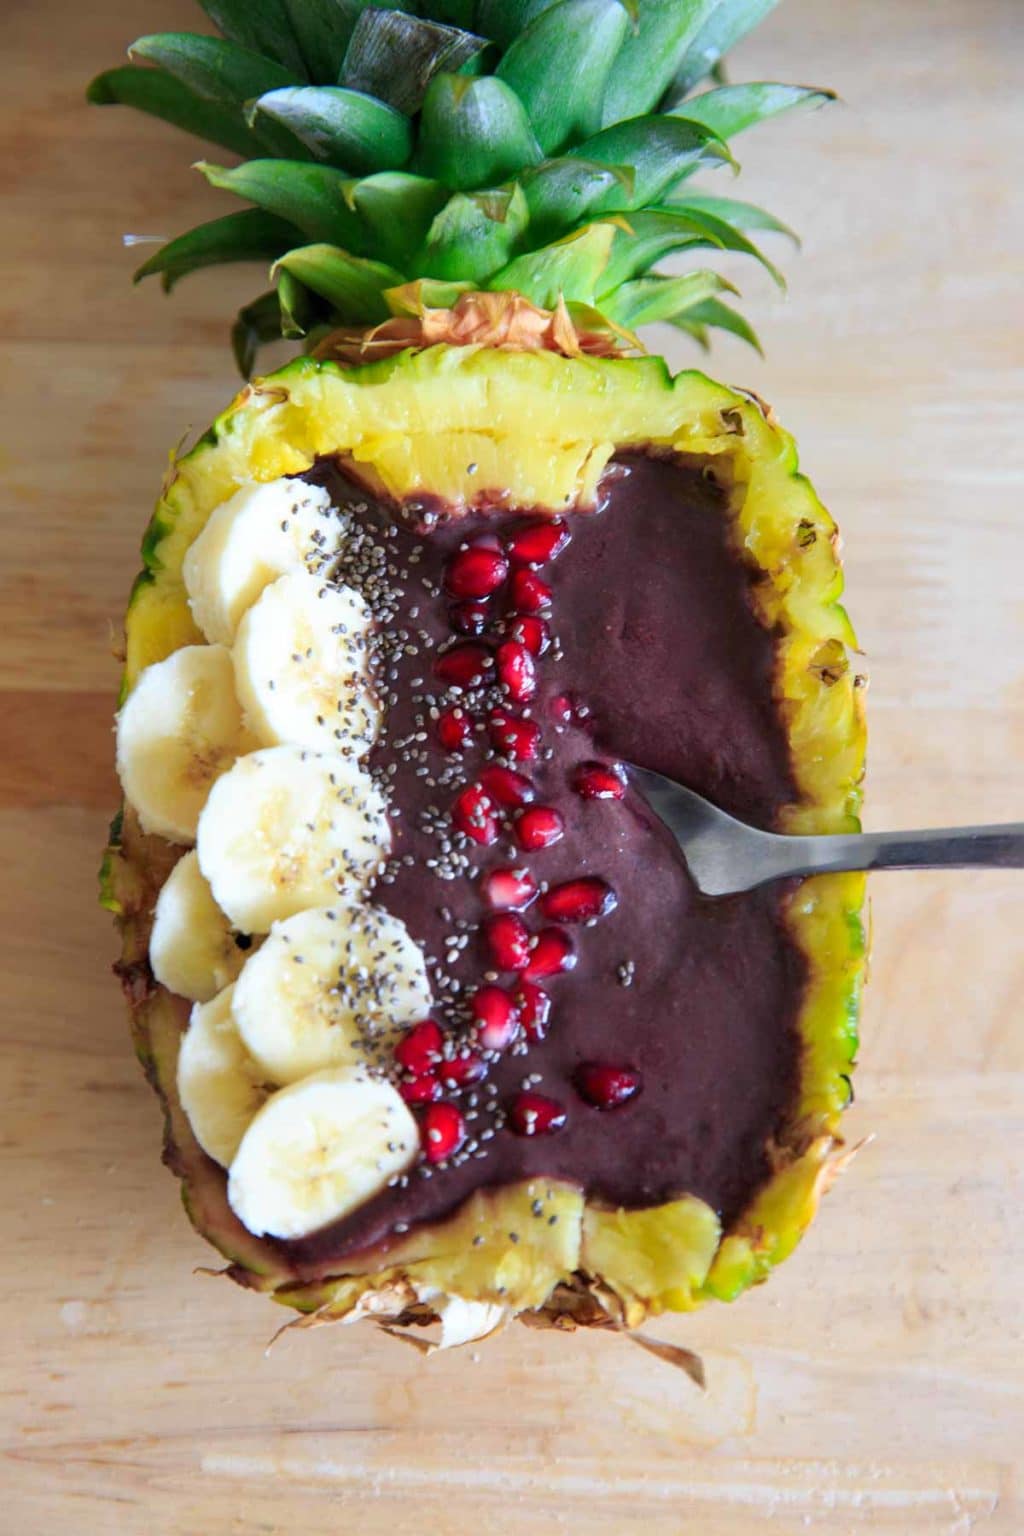 Pineapple Acai Smoothie displayed in a pineapple topped with banana slices, chia seeds and pomegranate seeeds